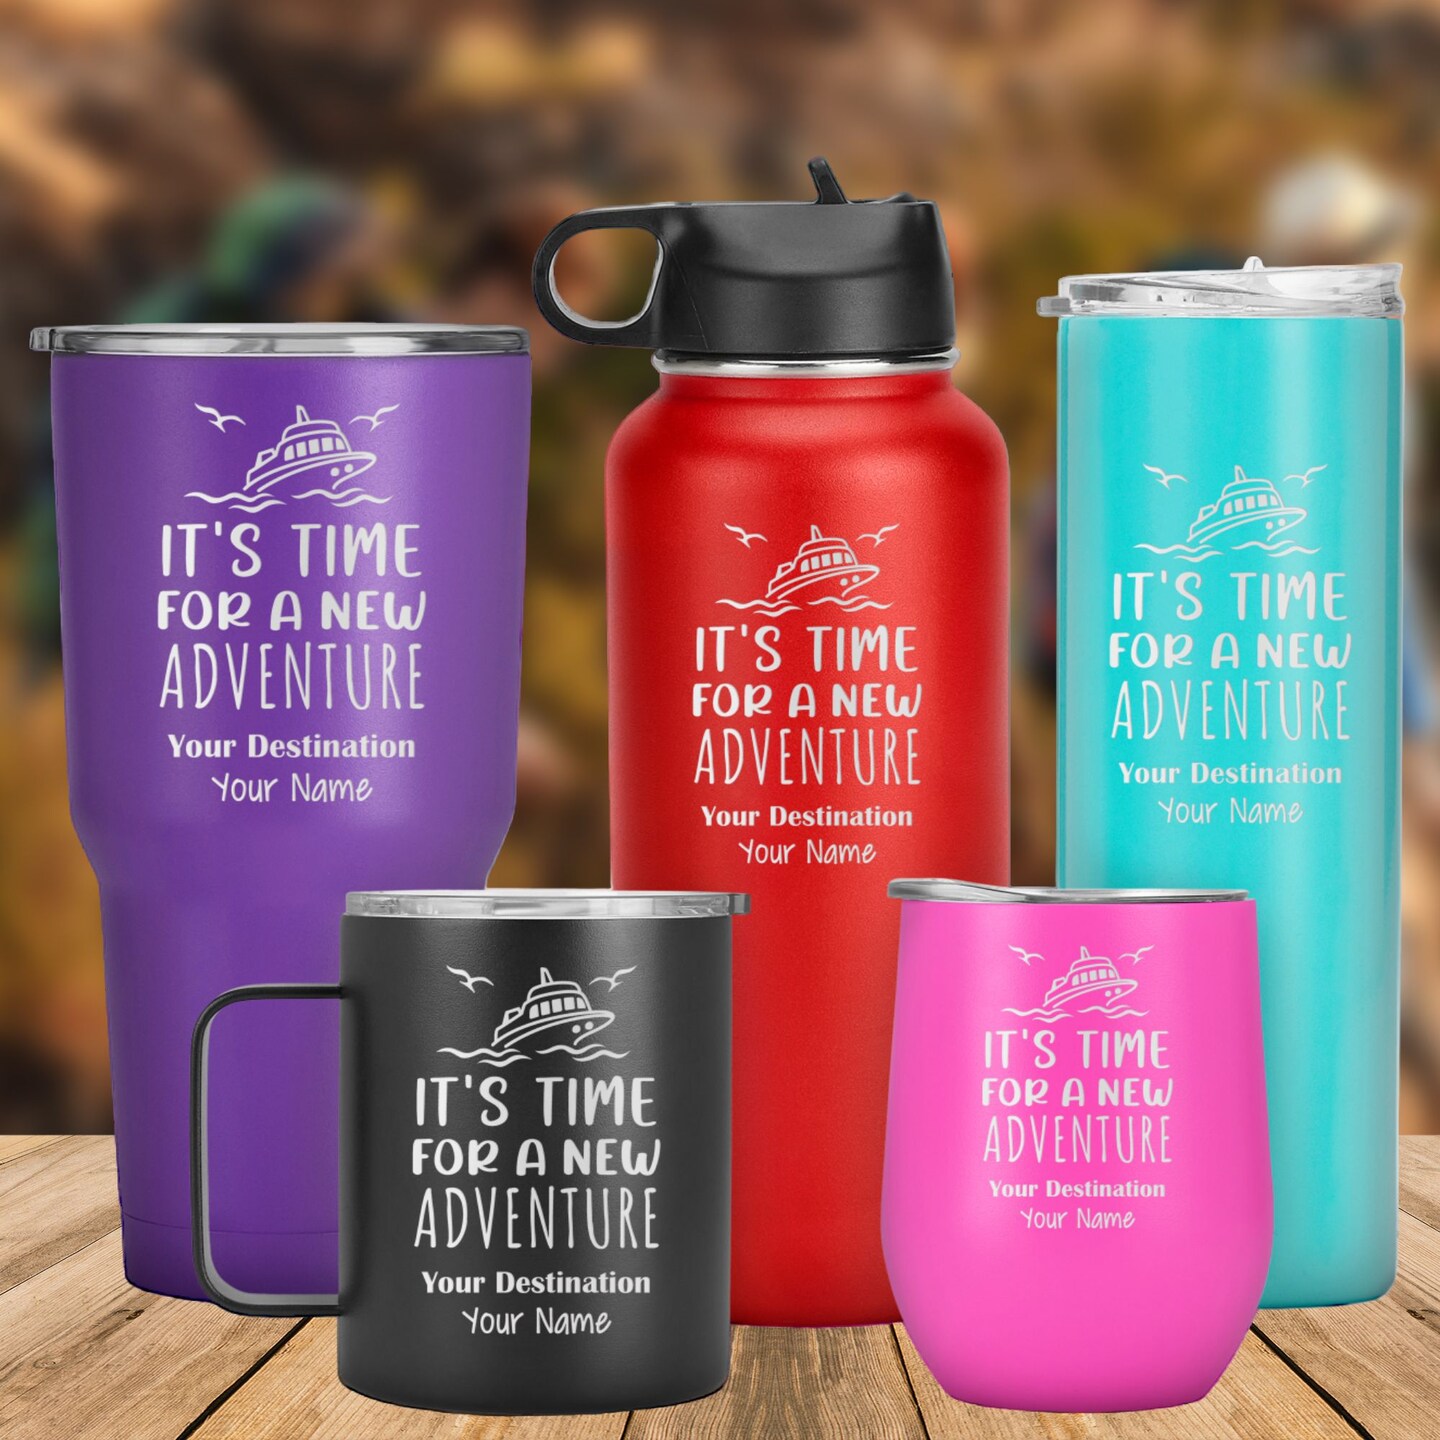 Take This Insulated Coffee Mug on Your Next Adventure